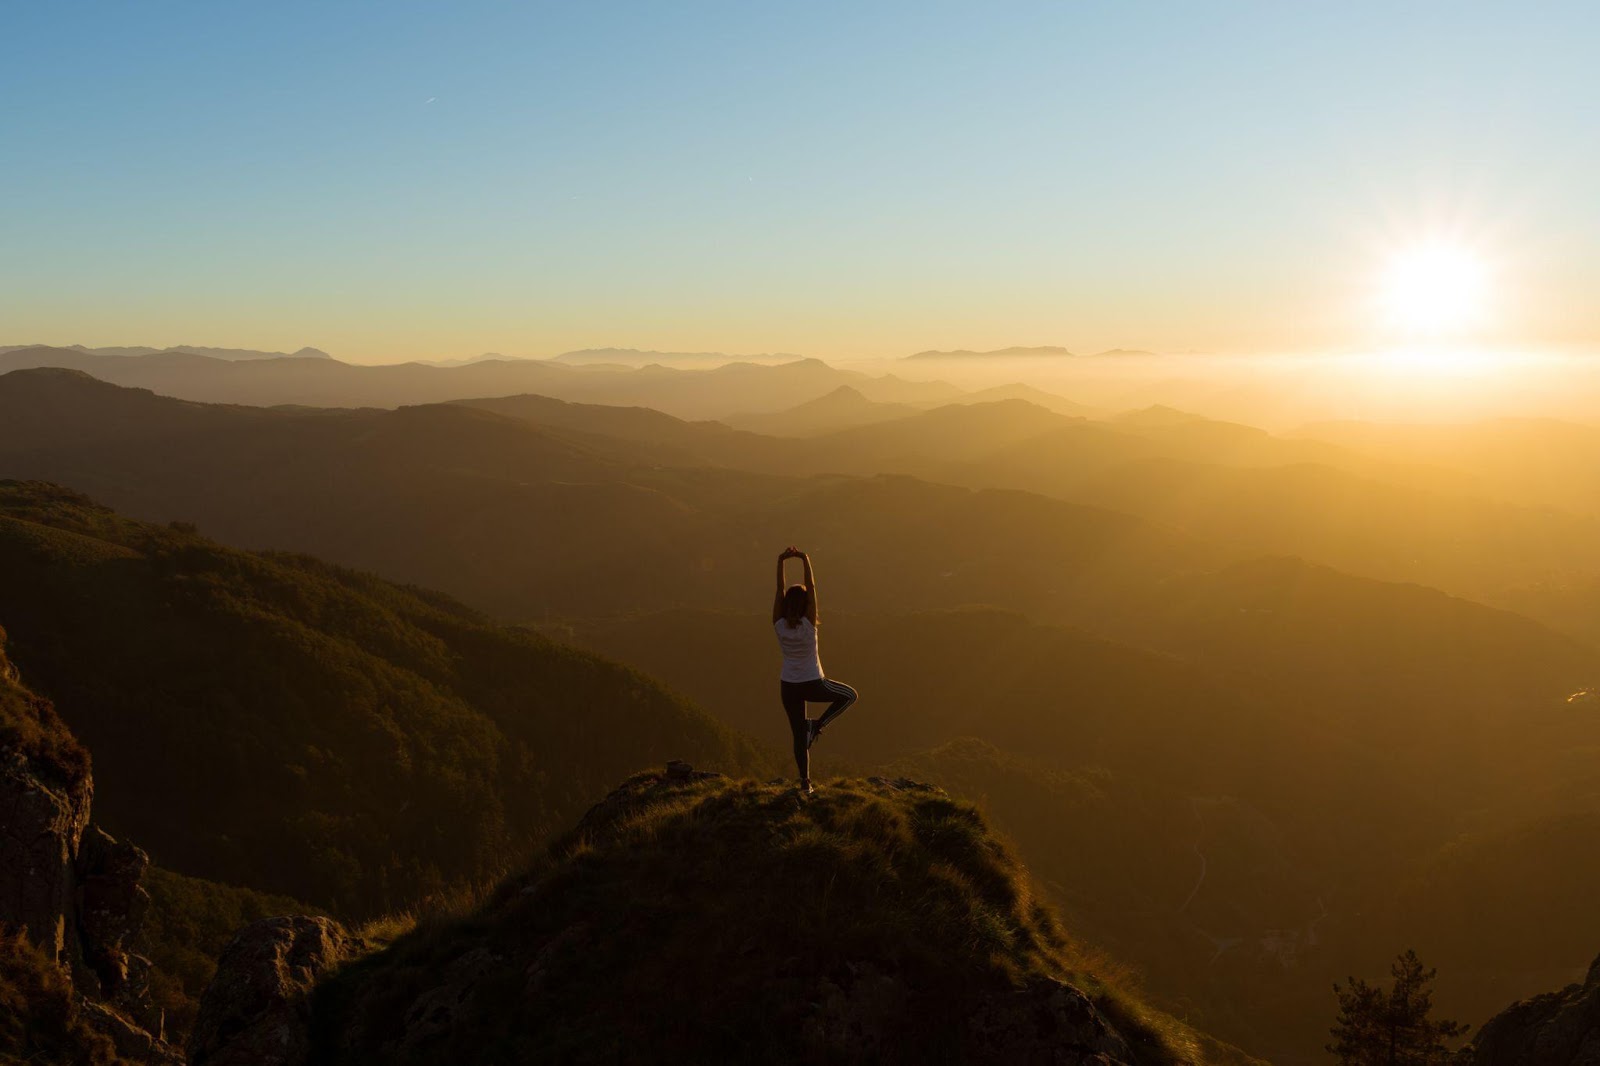 we can overcome social anxiety at work through relaxation shows a woman on top of a mountain